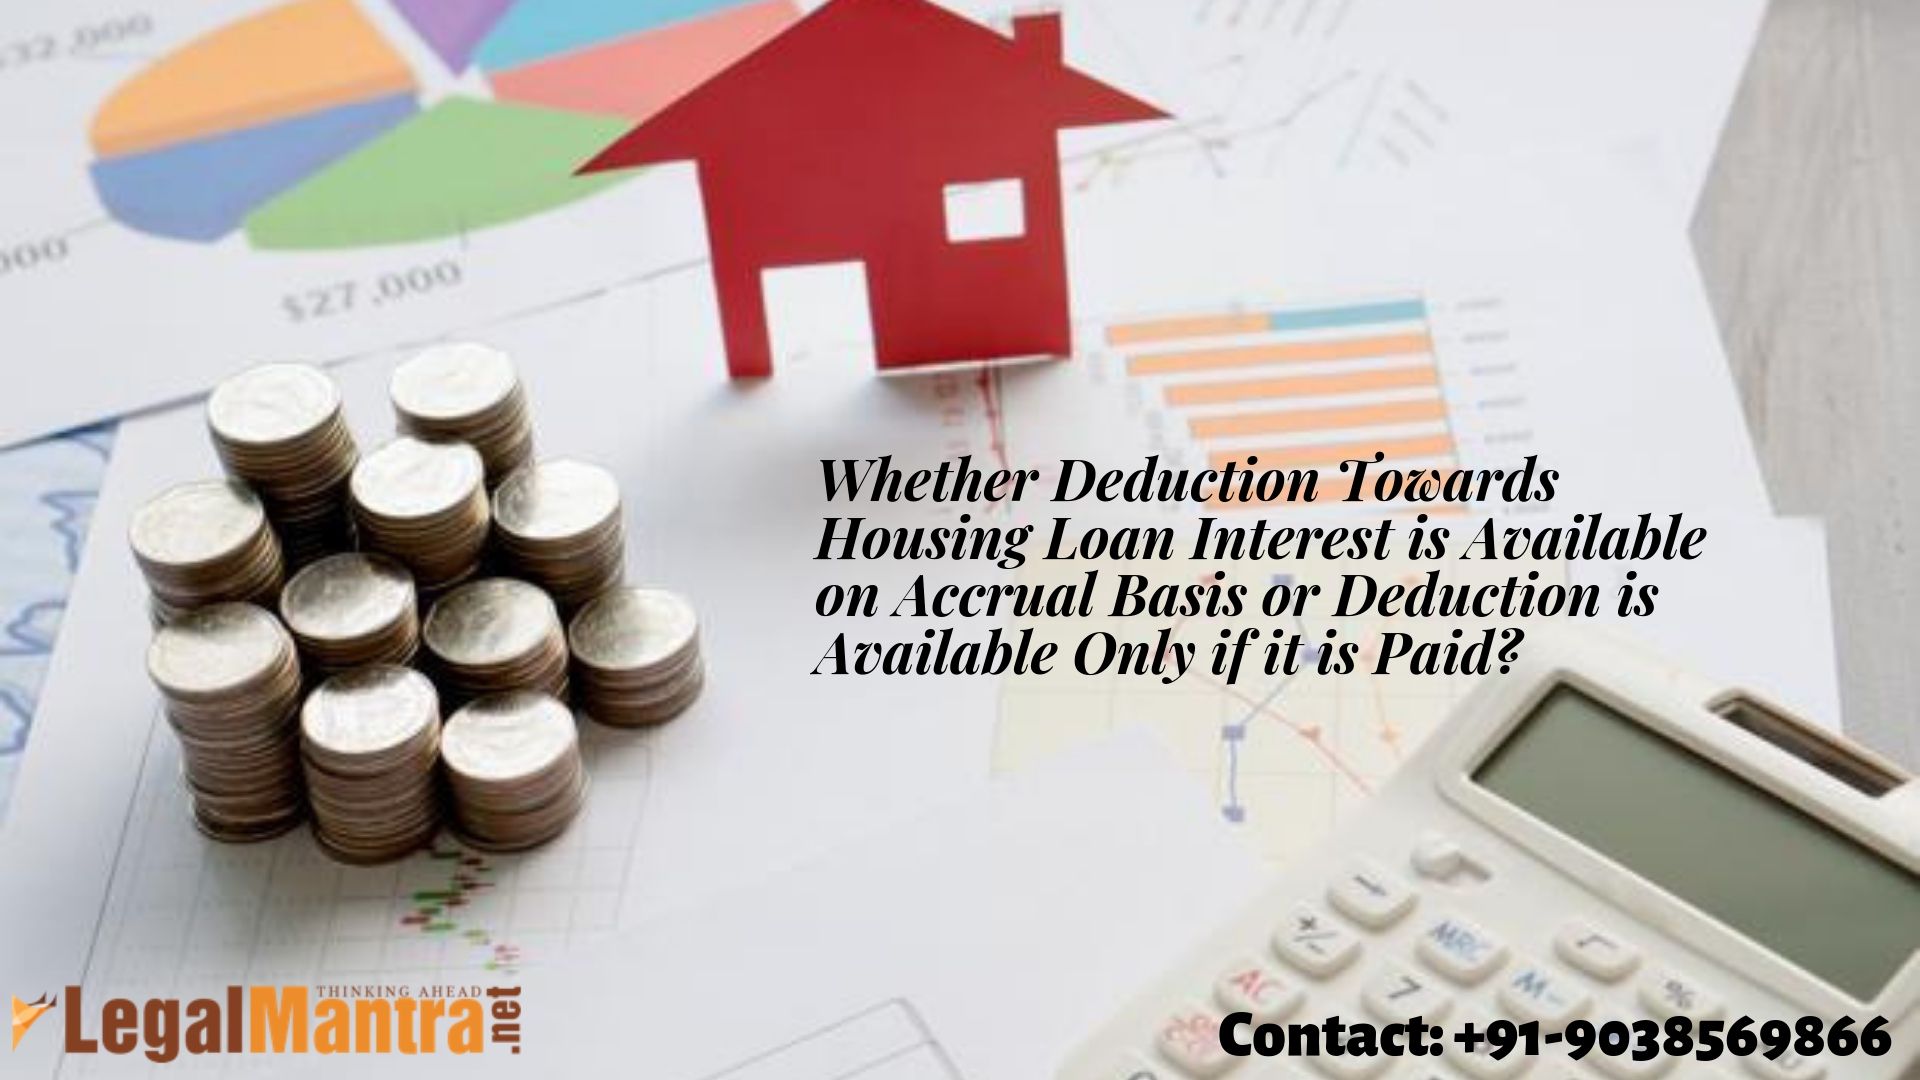 Whether Deduction Towards Housing Loan Interest is Available on Accrual Basis or Deduction is Available Only if it is Paid?